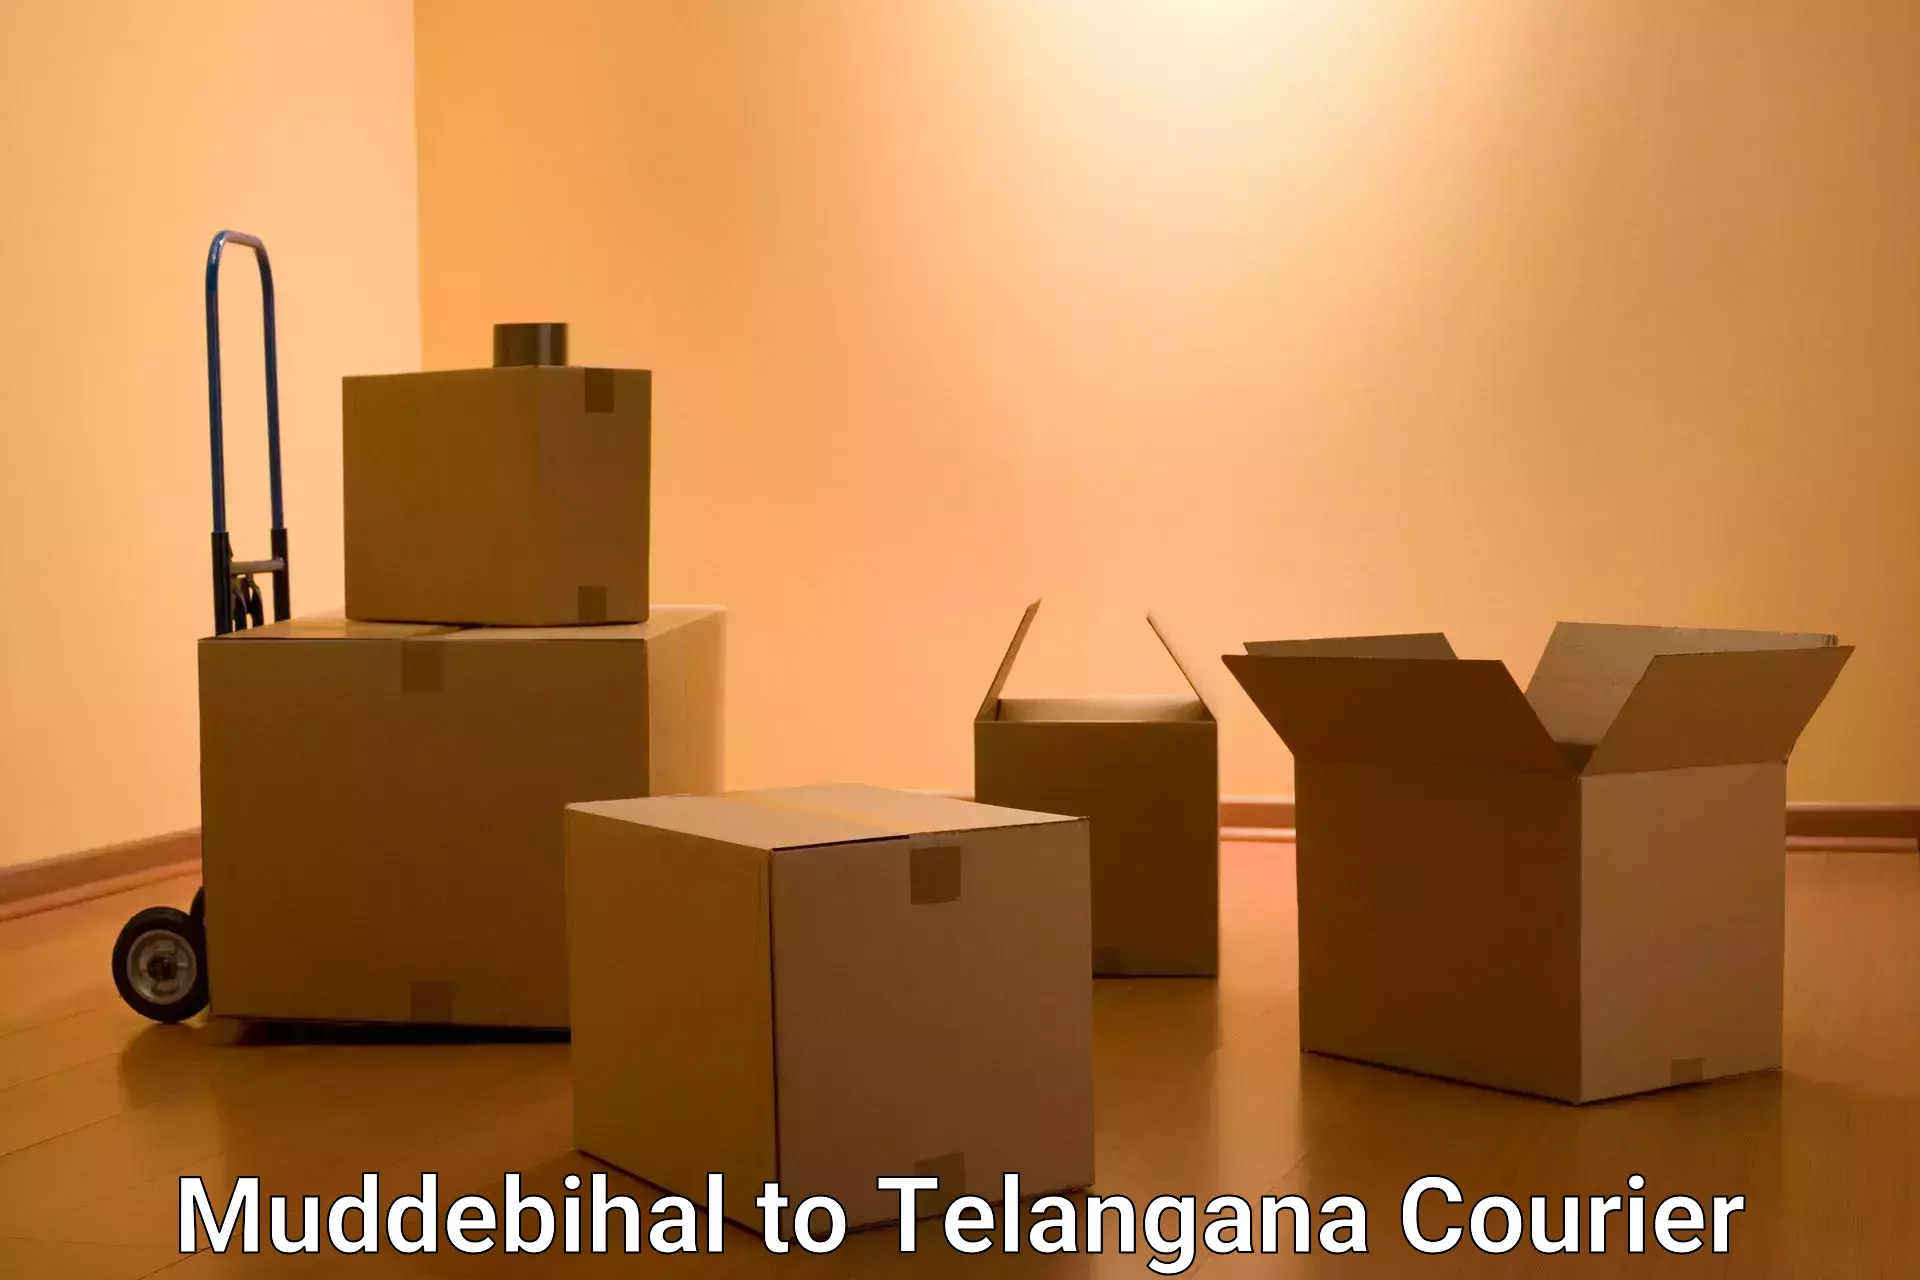 24-hour delivery options Muddebihal to Warangal